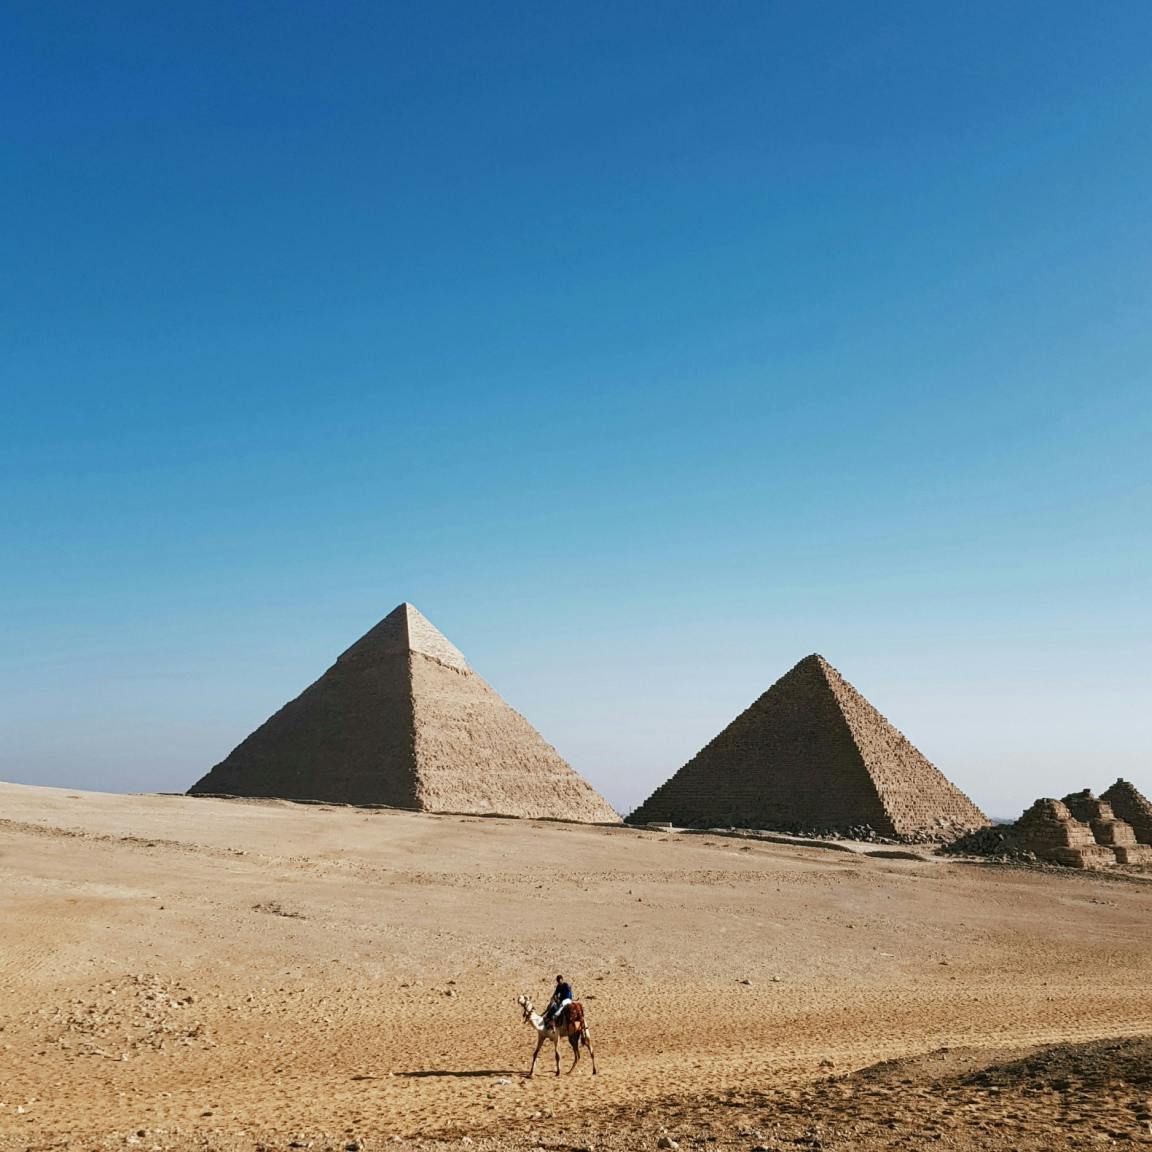 The great pyramids of Egypt with a camel and rider walking in the foreground